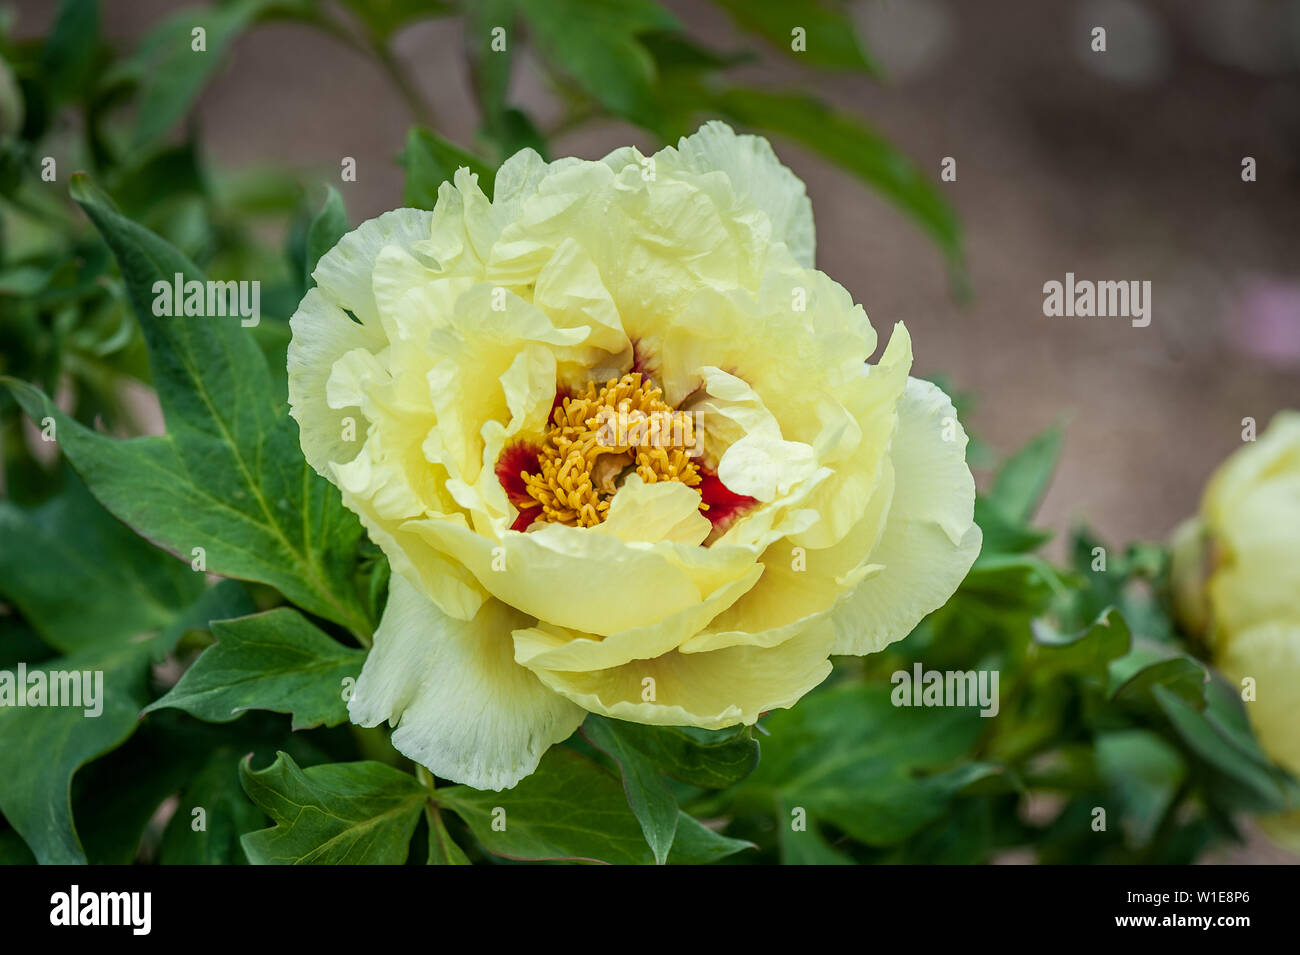 Beauty yellow peony. Chinese peony. Flowers background. Selective focus, top view, close-up. Stock Photo